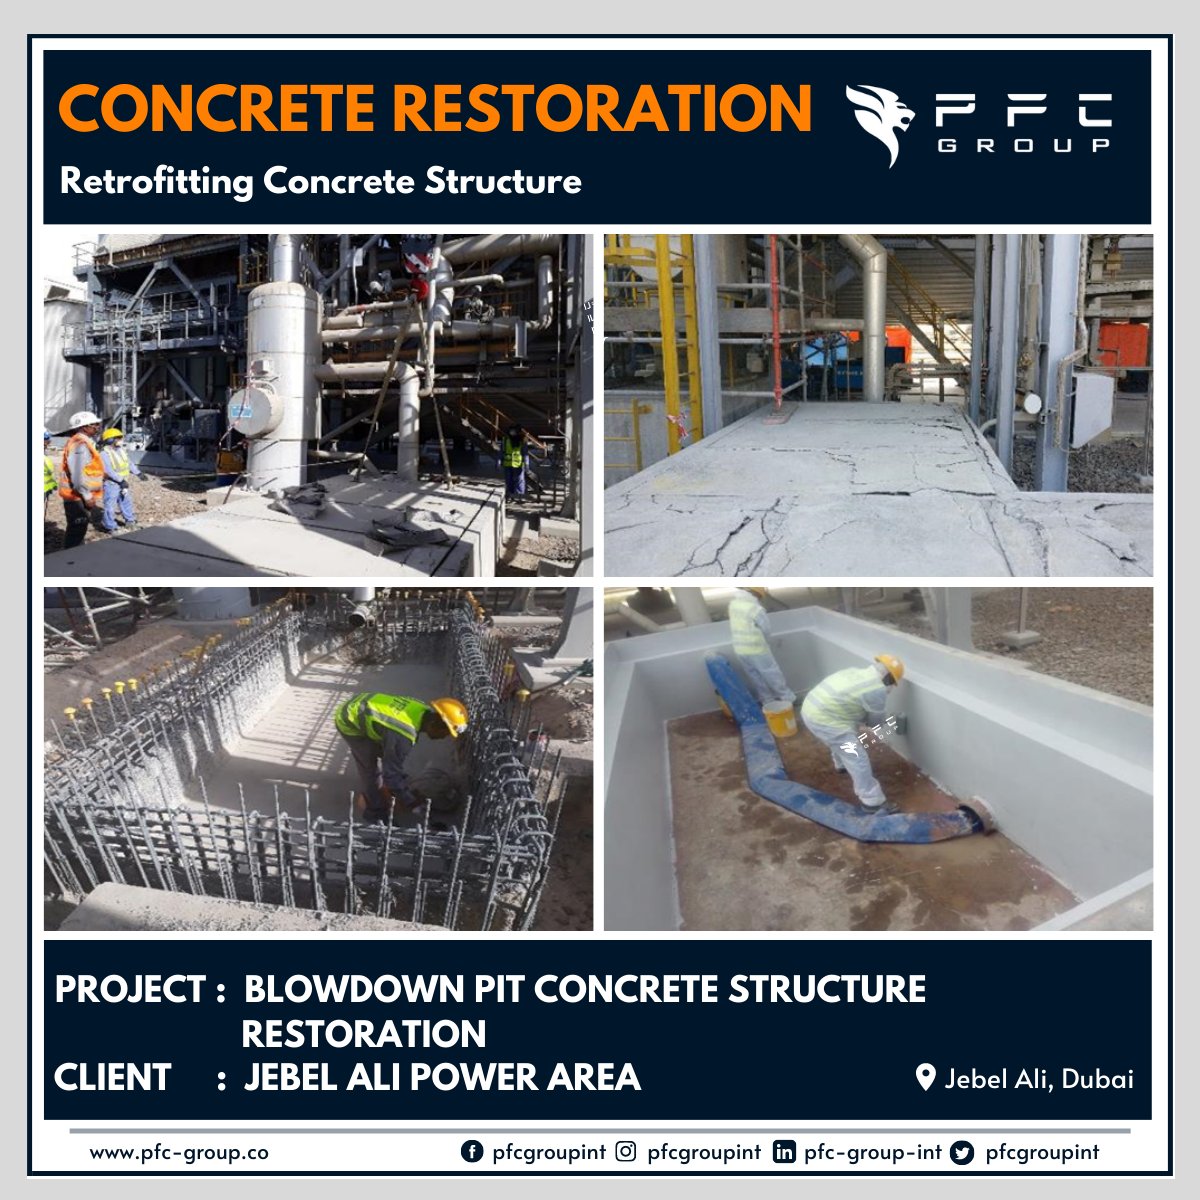 PFC Group has expertise in Concrete Restoration Solutions across UAE, PFC Group has successfully finished the retrofitting works of a concrete structures at Jebel Ali, Dubai.

#retrofitting #concreteretrofitting #structuralretrofitting #buildingrenovation #buildingupgrade